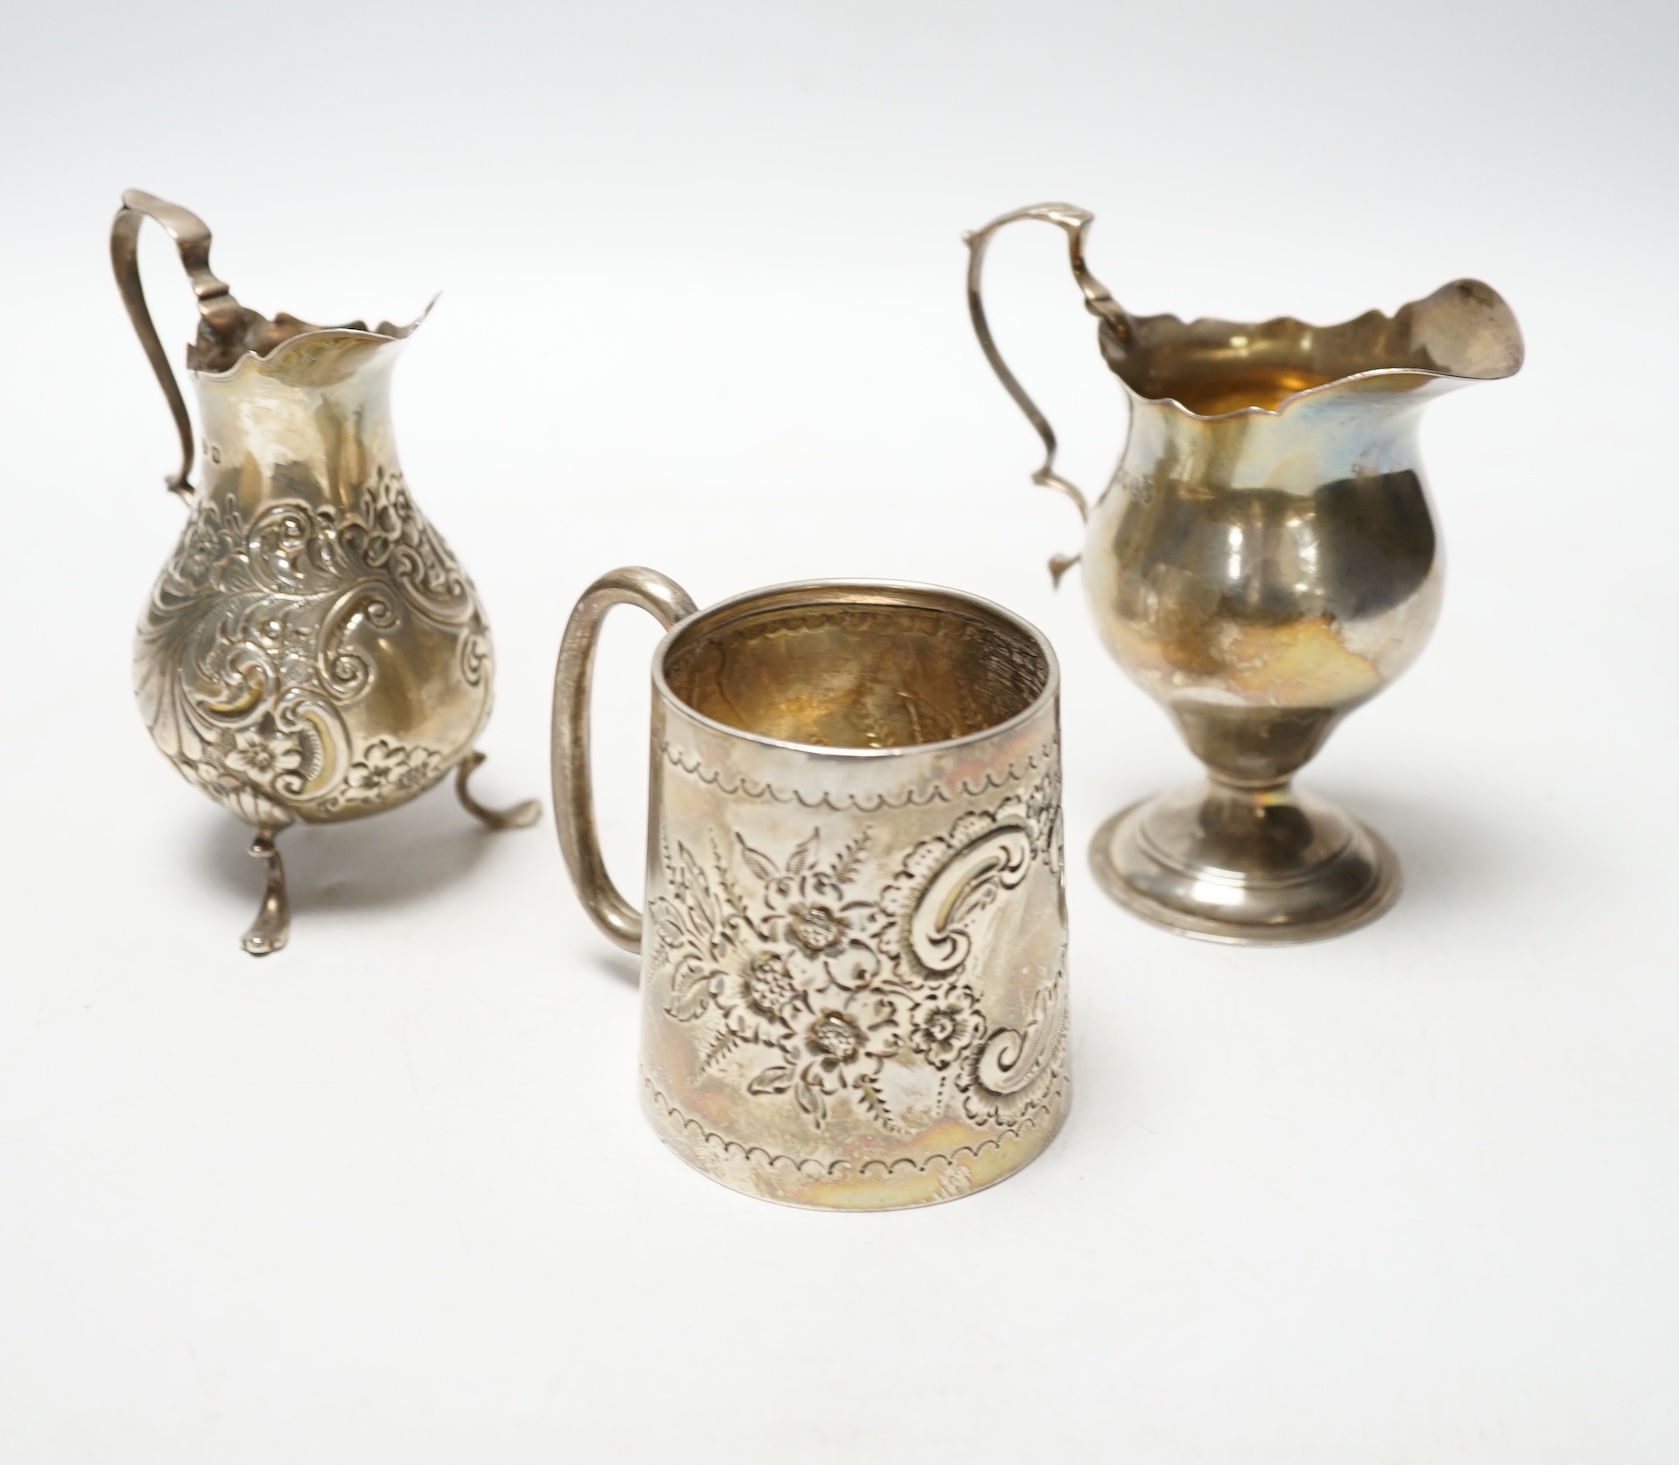 A Victorian silver inverted pyriform cream jug, London, 1886, 10.4cm, another, embossed, Chester, 1896 and an Edwardian silver embossed christening mug, Chester, 1902, 8.1oz.